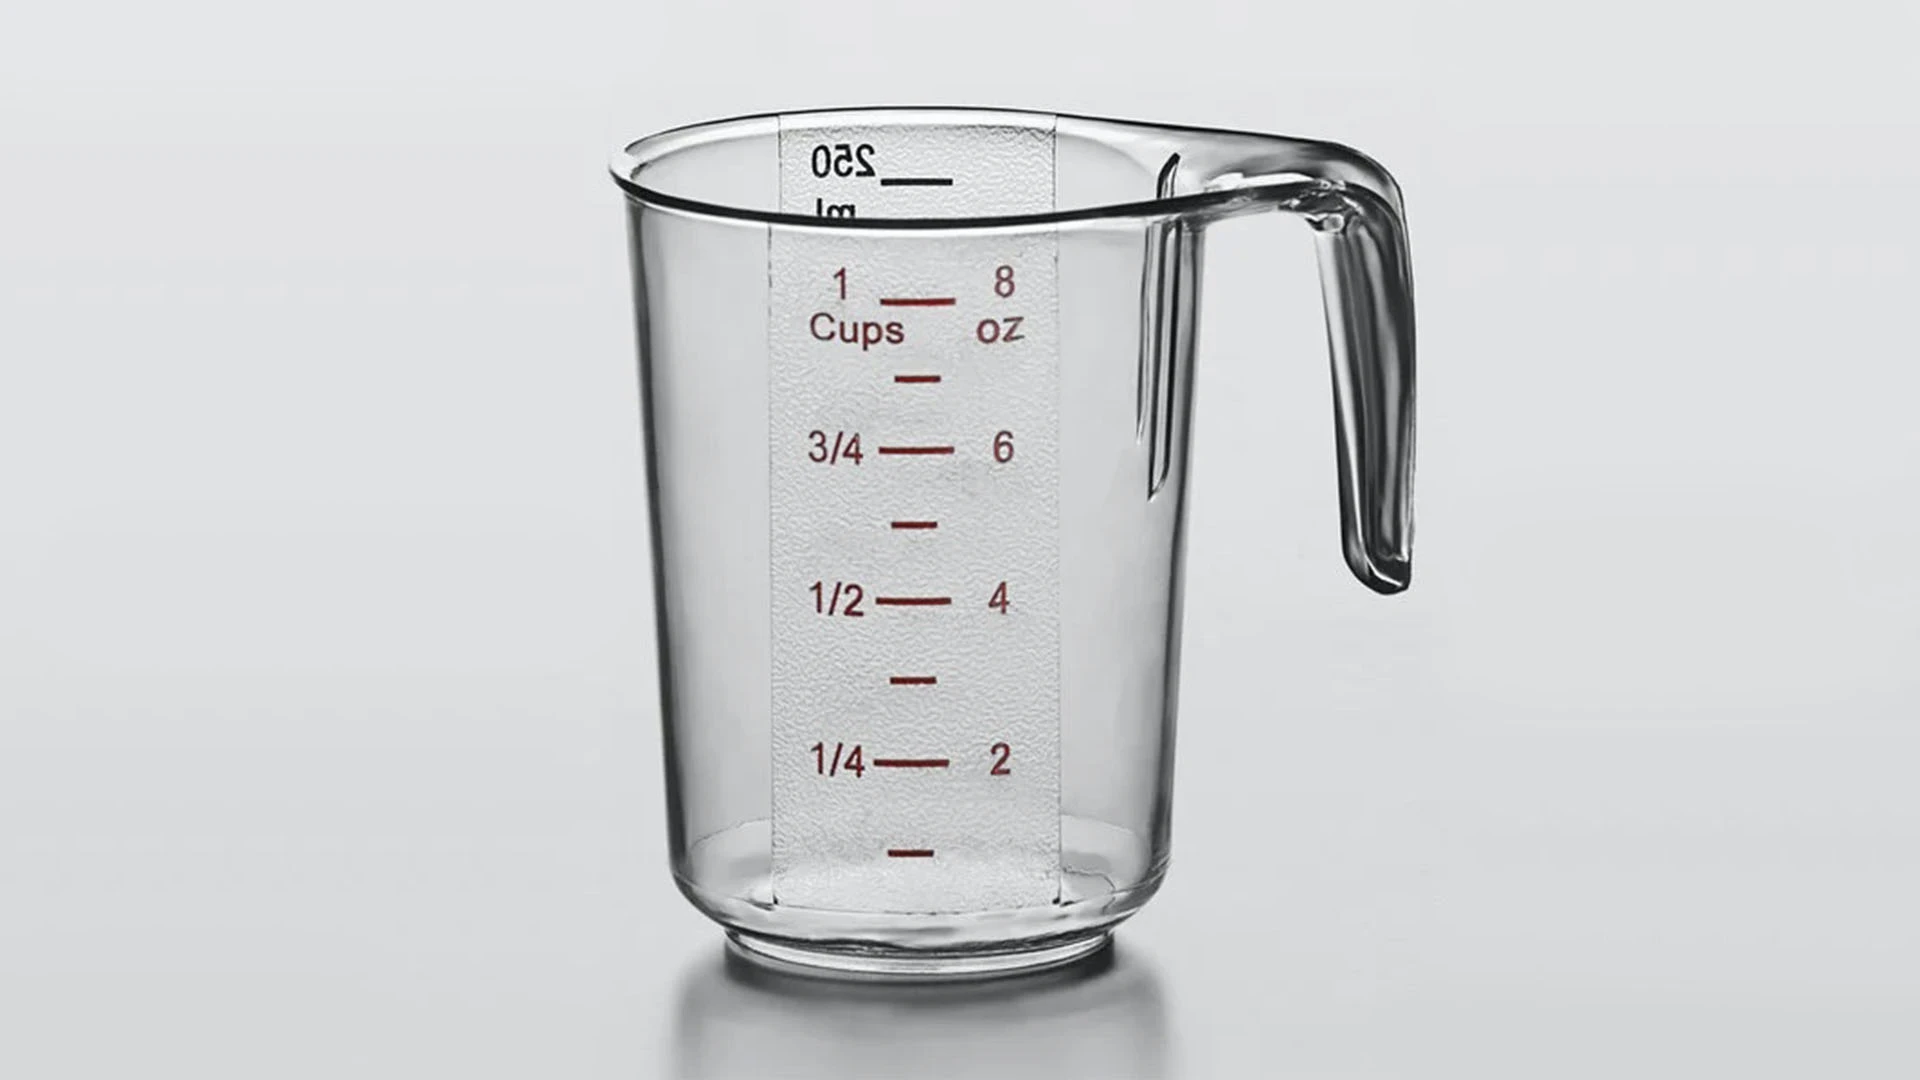 Converting Cups to Ounces